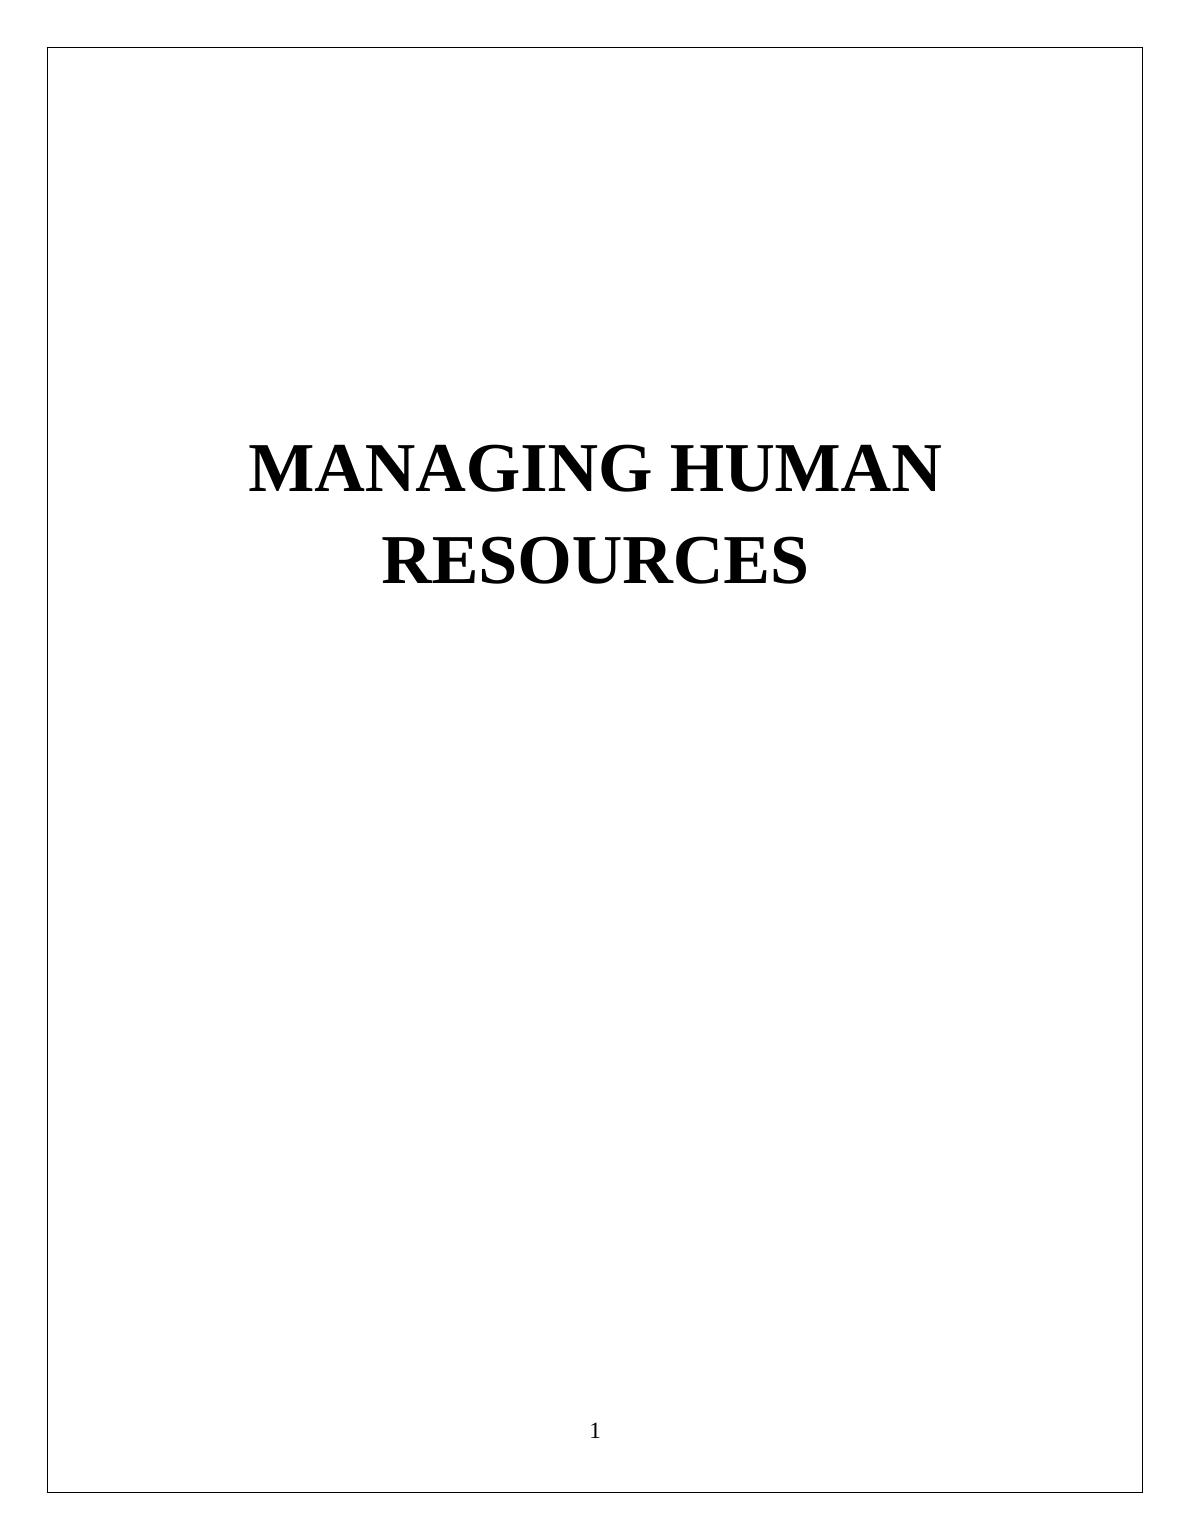 assignment on human resources